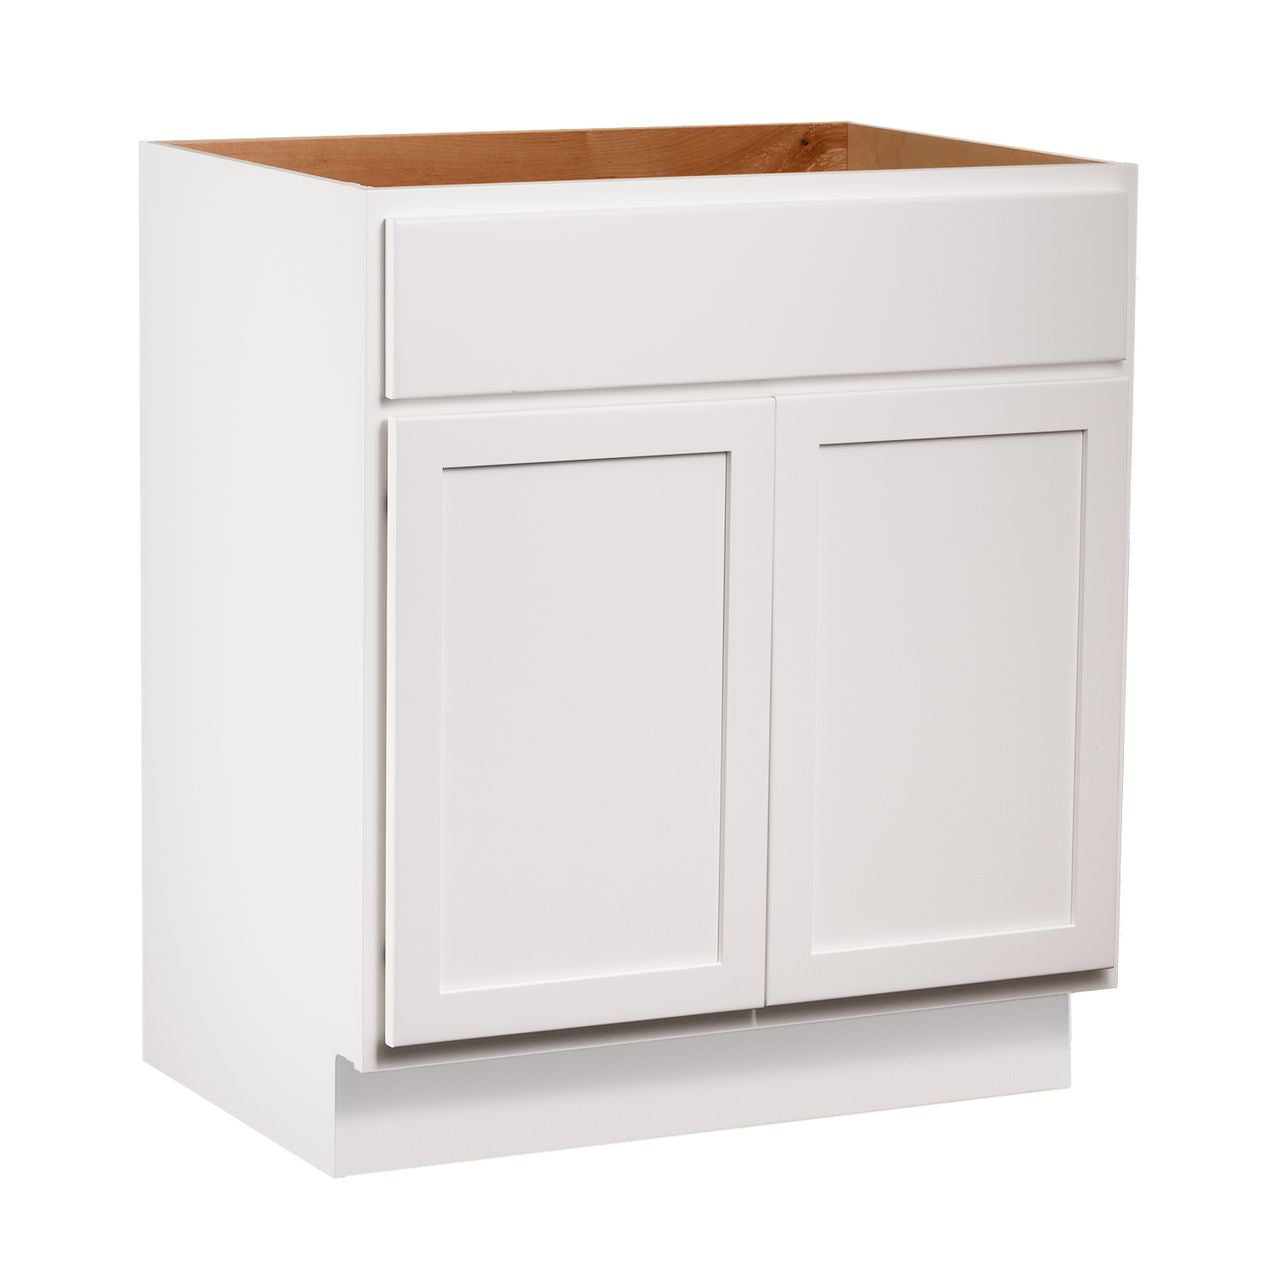 Quicklock RTA (Ready-to-Assemble) Pure White Vanity Base Cabinet- 24"W